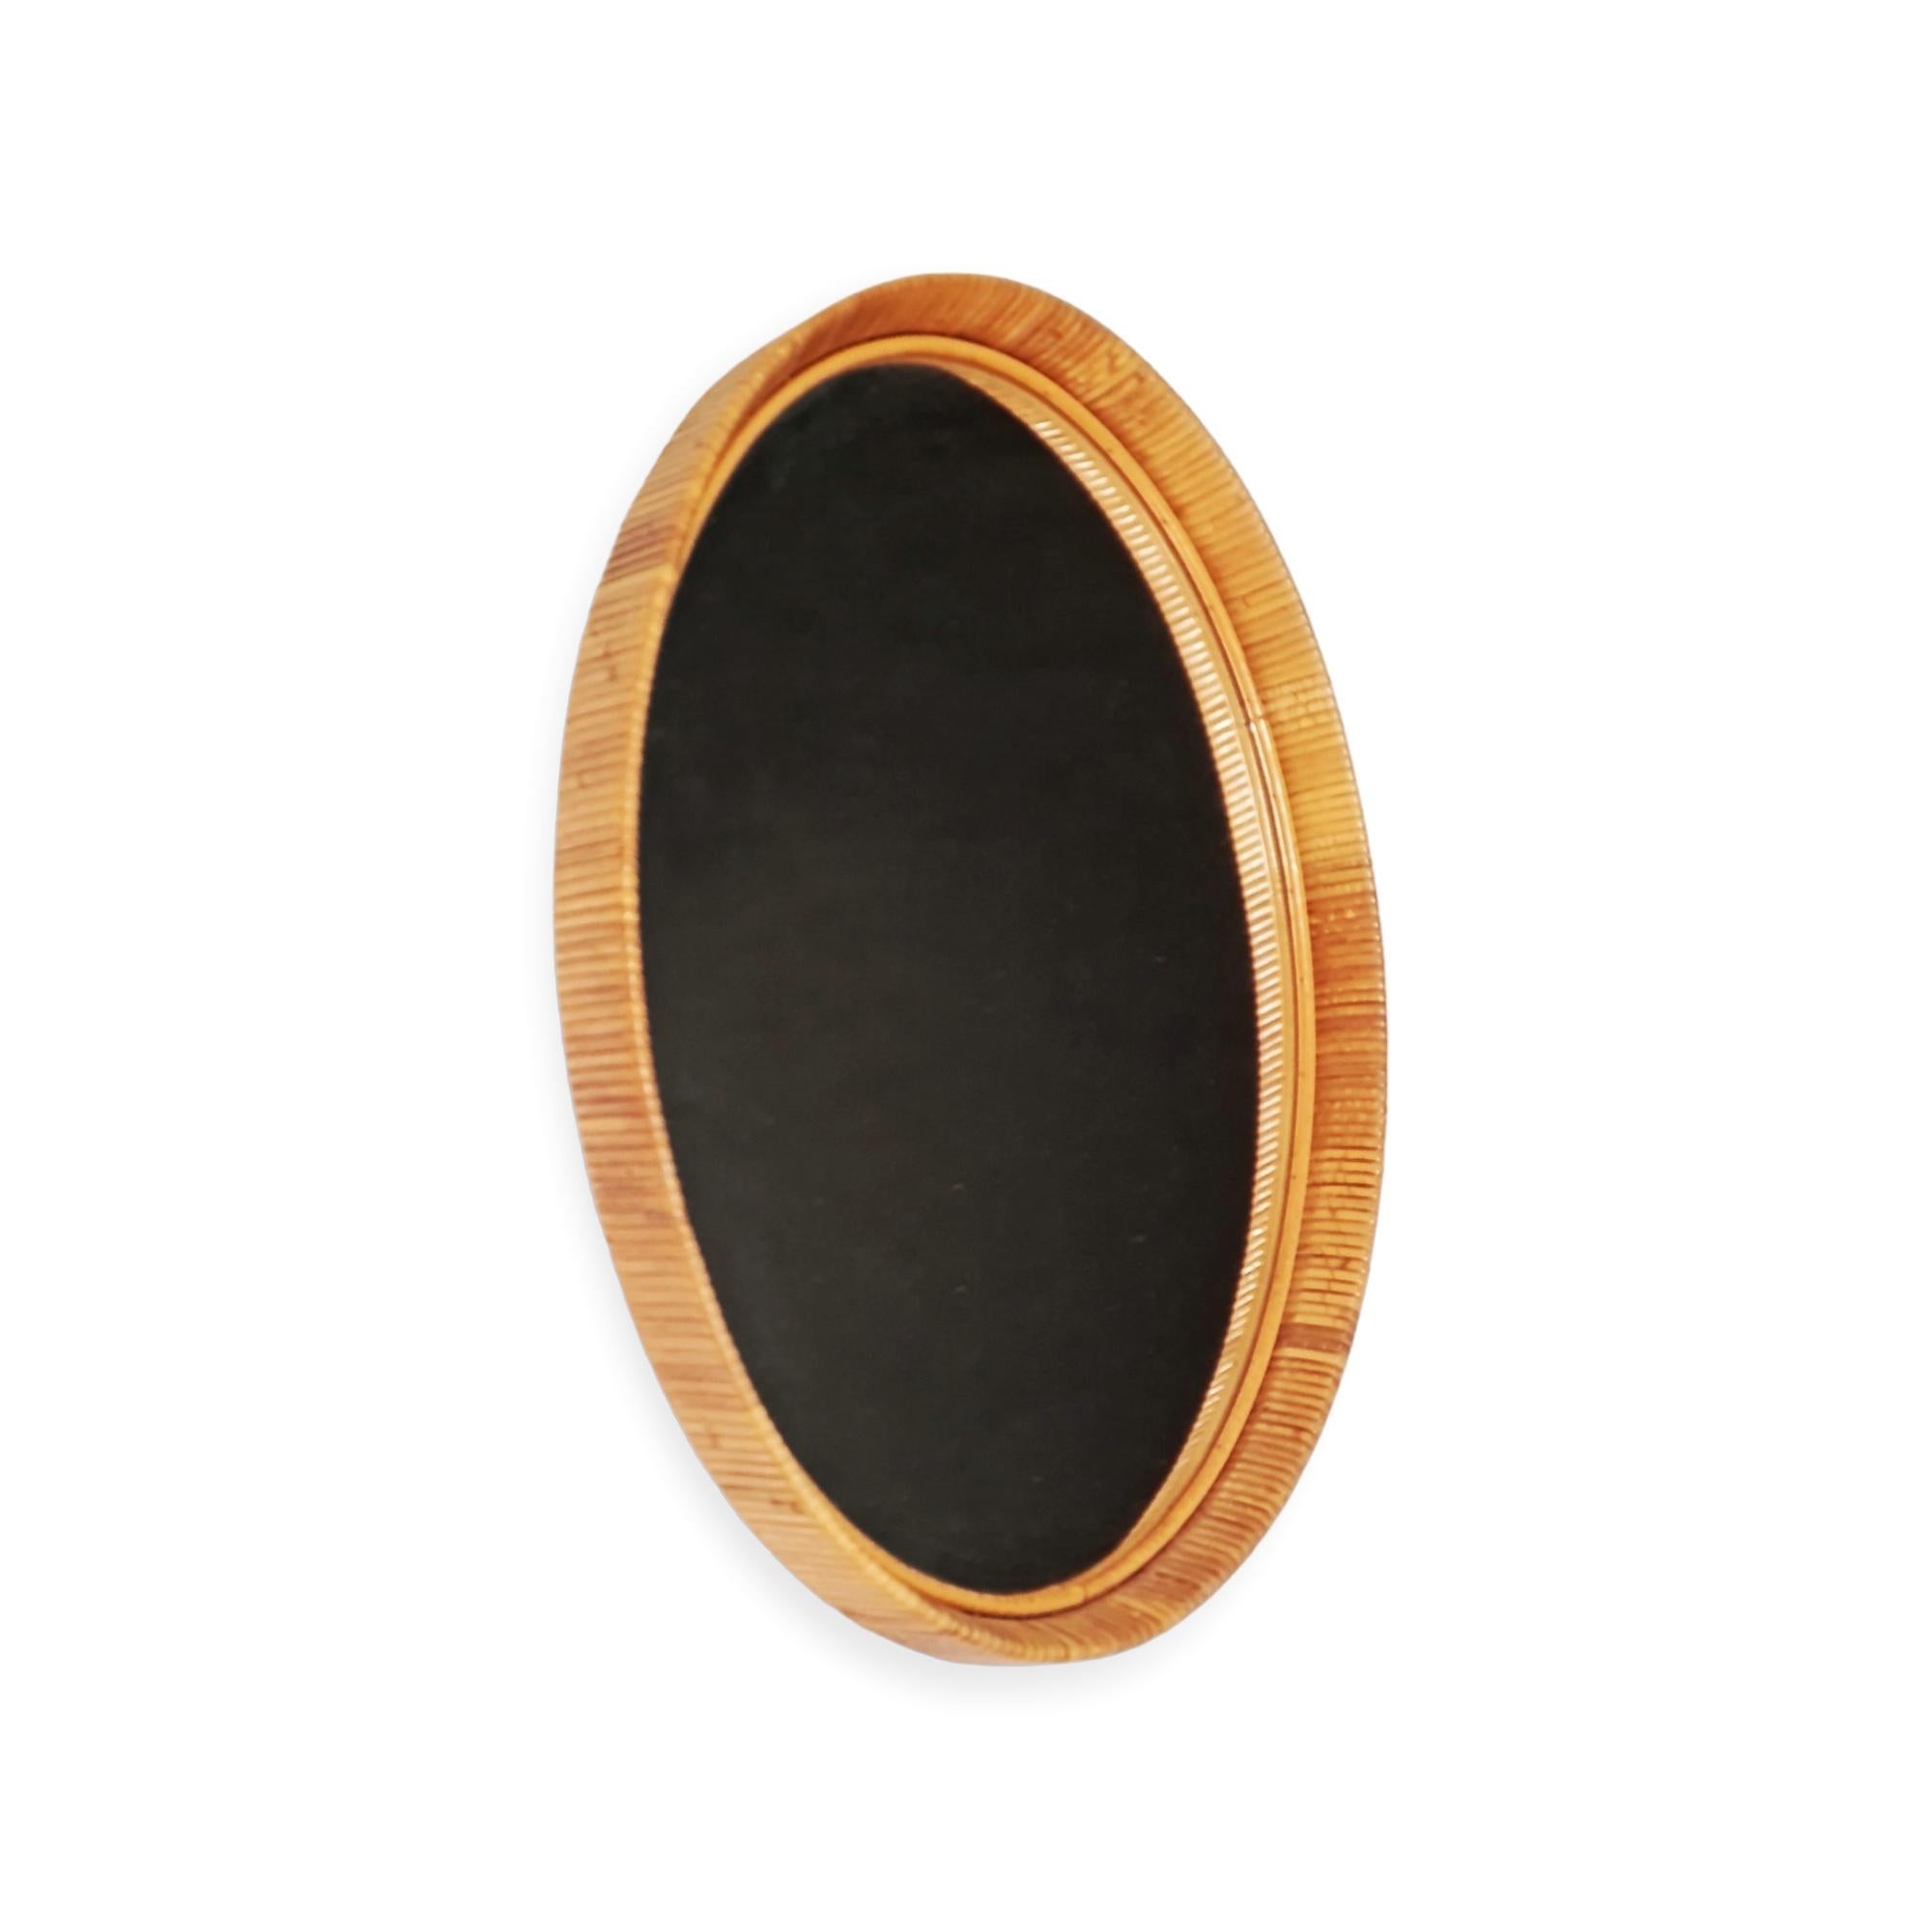 A beautiful wall hanging mirror with stunning vintage patina to the rattan frame.
It is from about the 1950s-1960s, and in absolutely original condition.
As it is not stampped, it is almost impossible for us to attribute it to a specific designer or